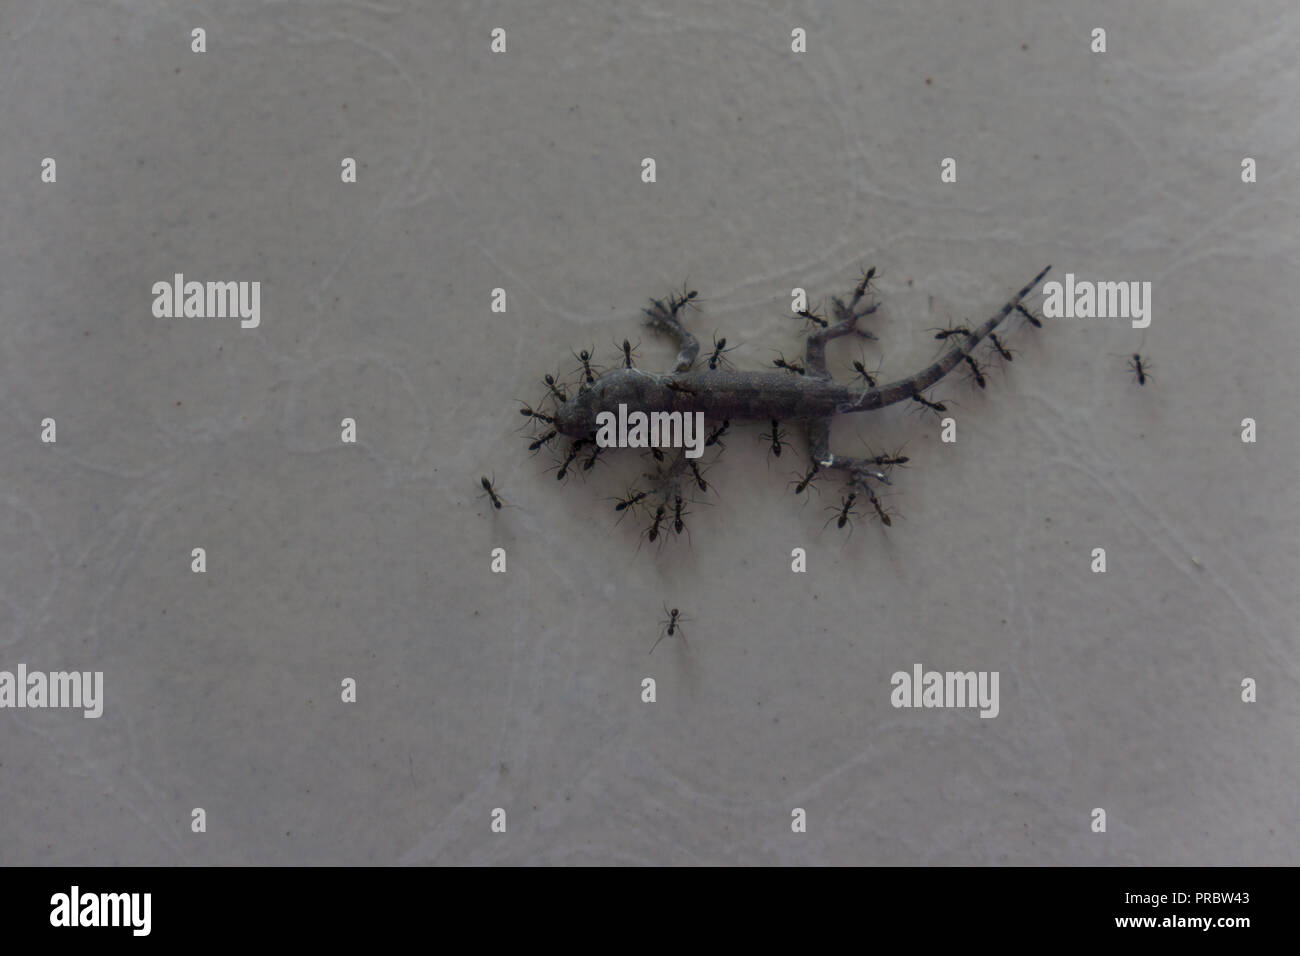 A small lizard, gecko, being carried and moved by ants on a white floor. Stock Photo